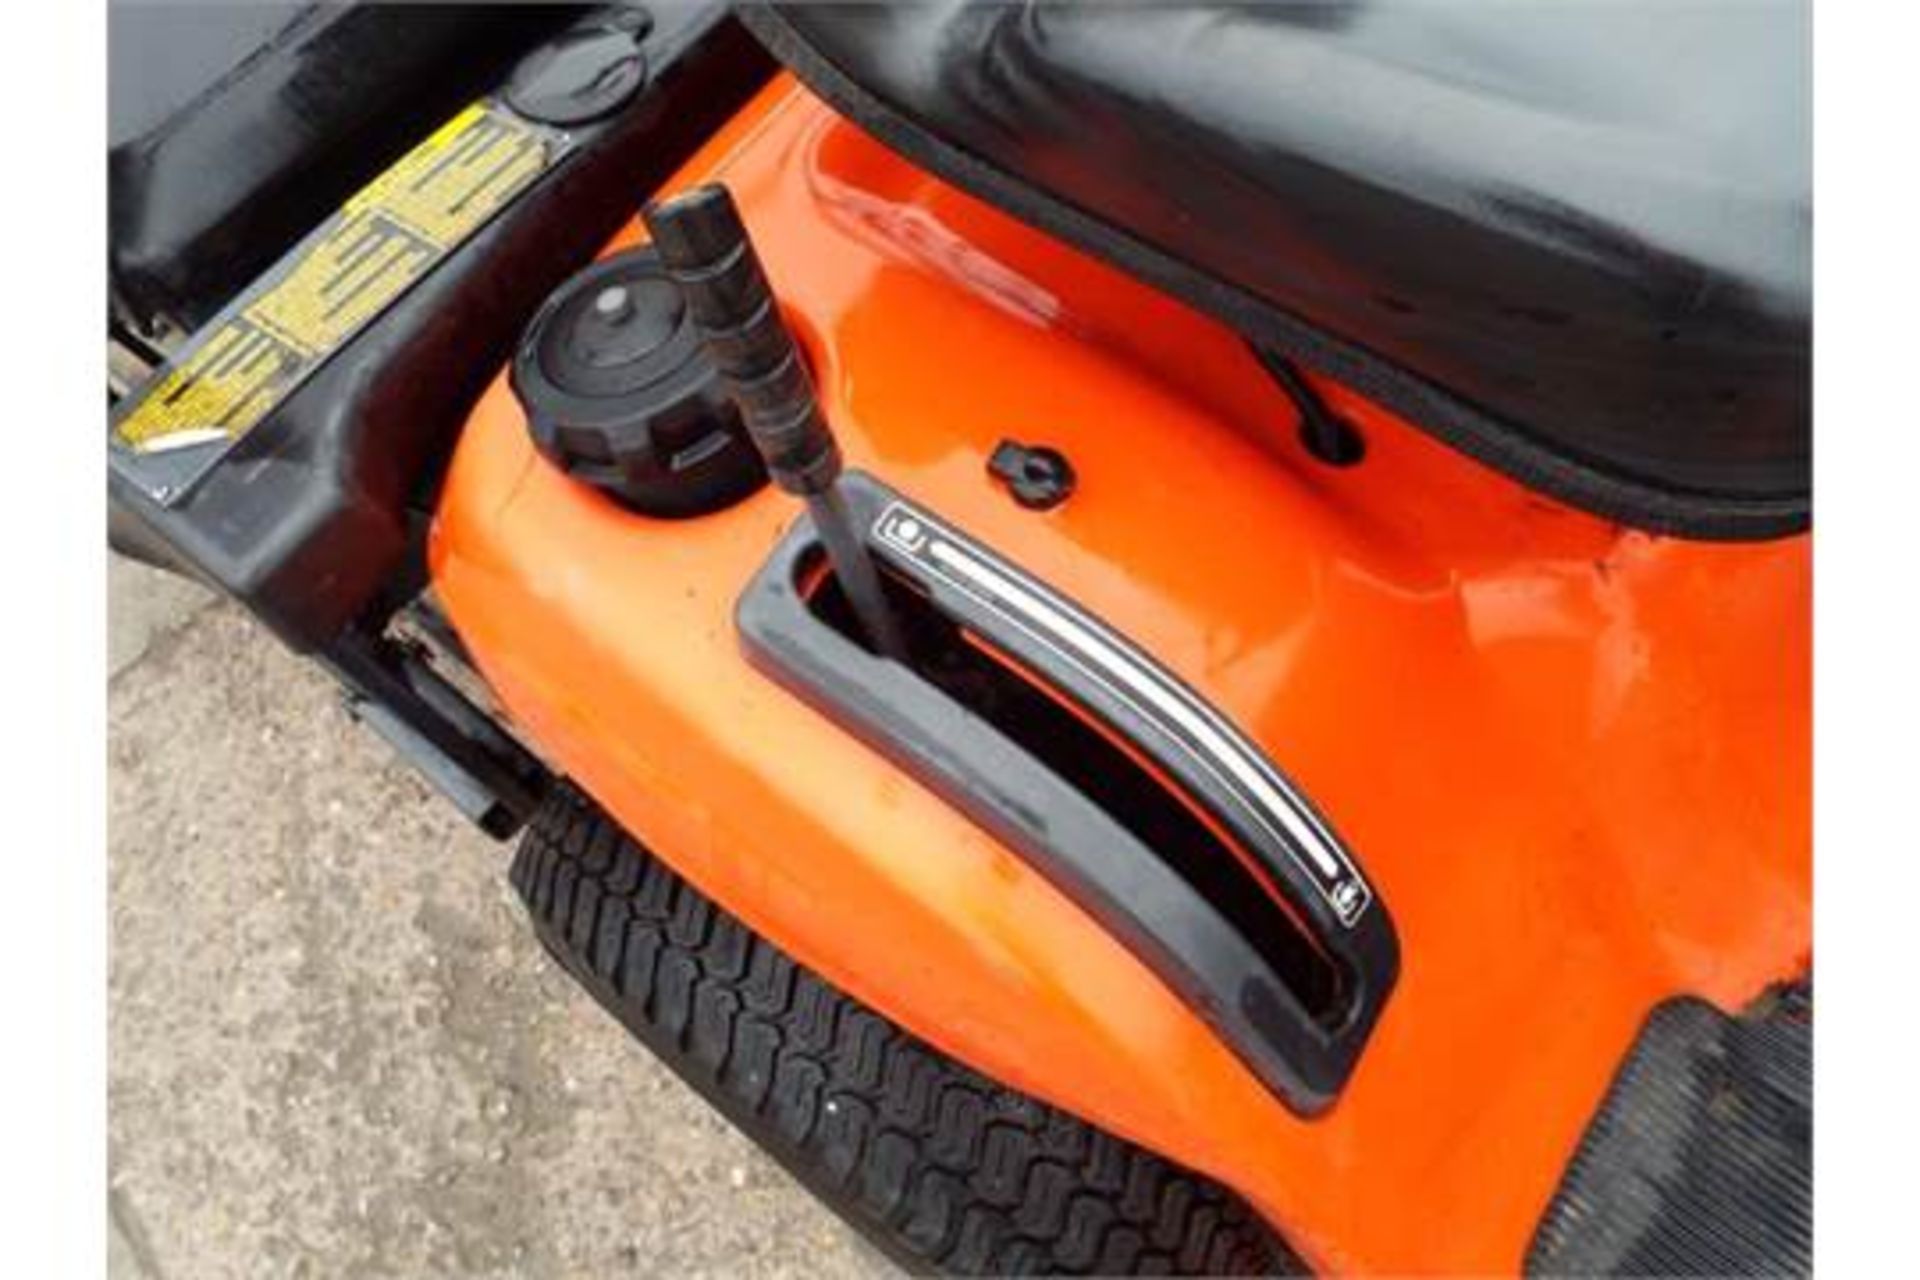 2008 Kubota G21 Ride On Mower with Glide-Cut System and High Dump Grass Collector - Image 14 of 22